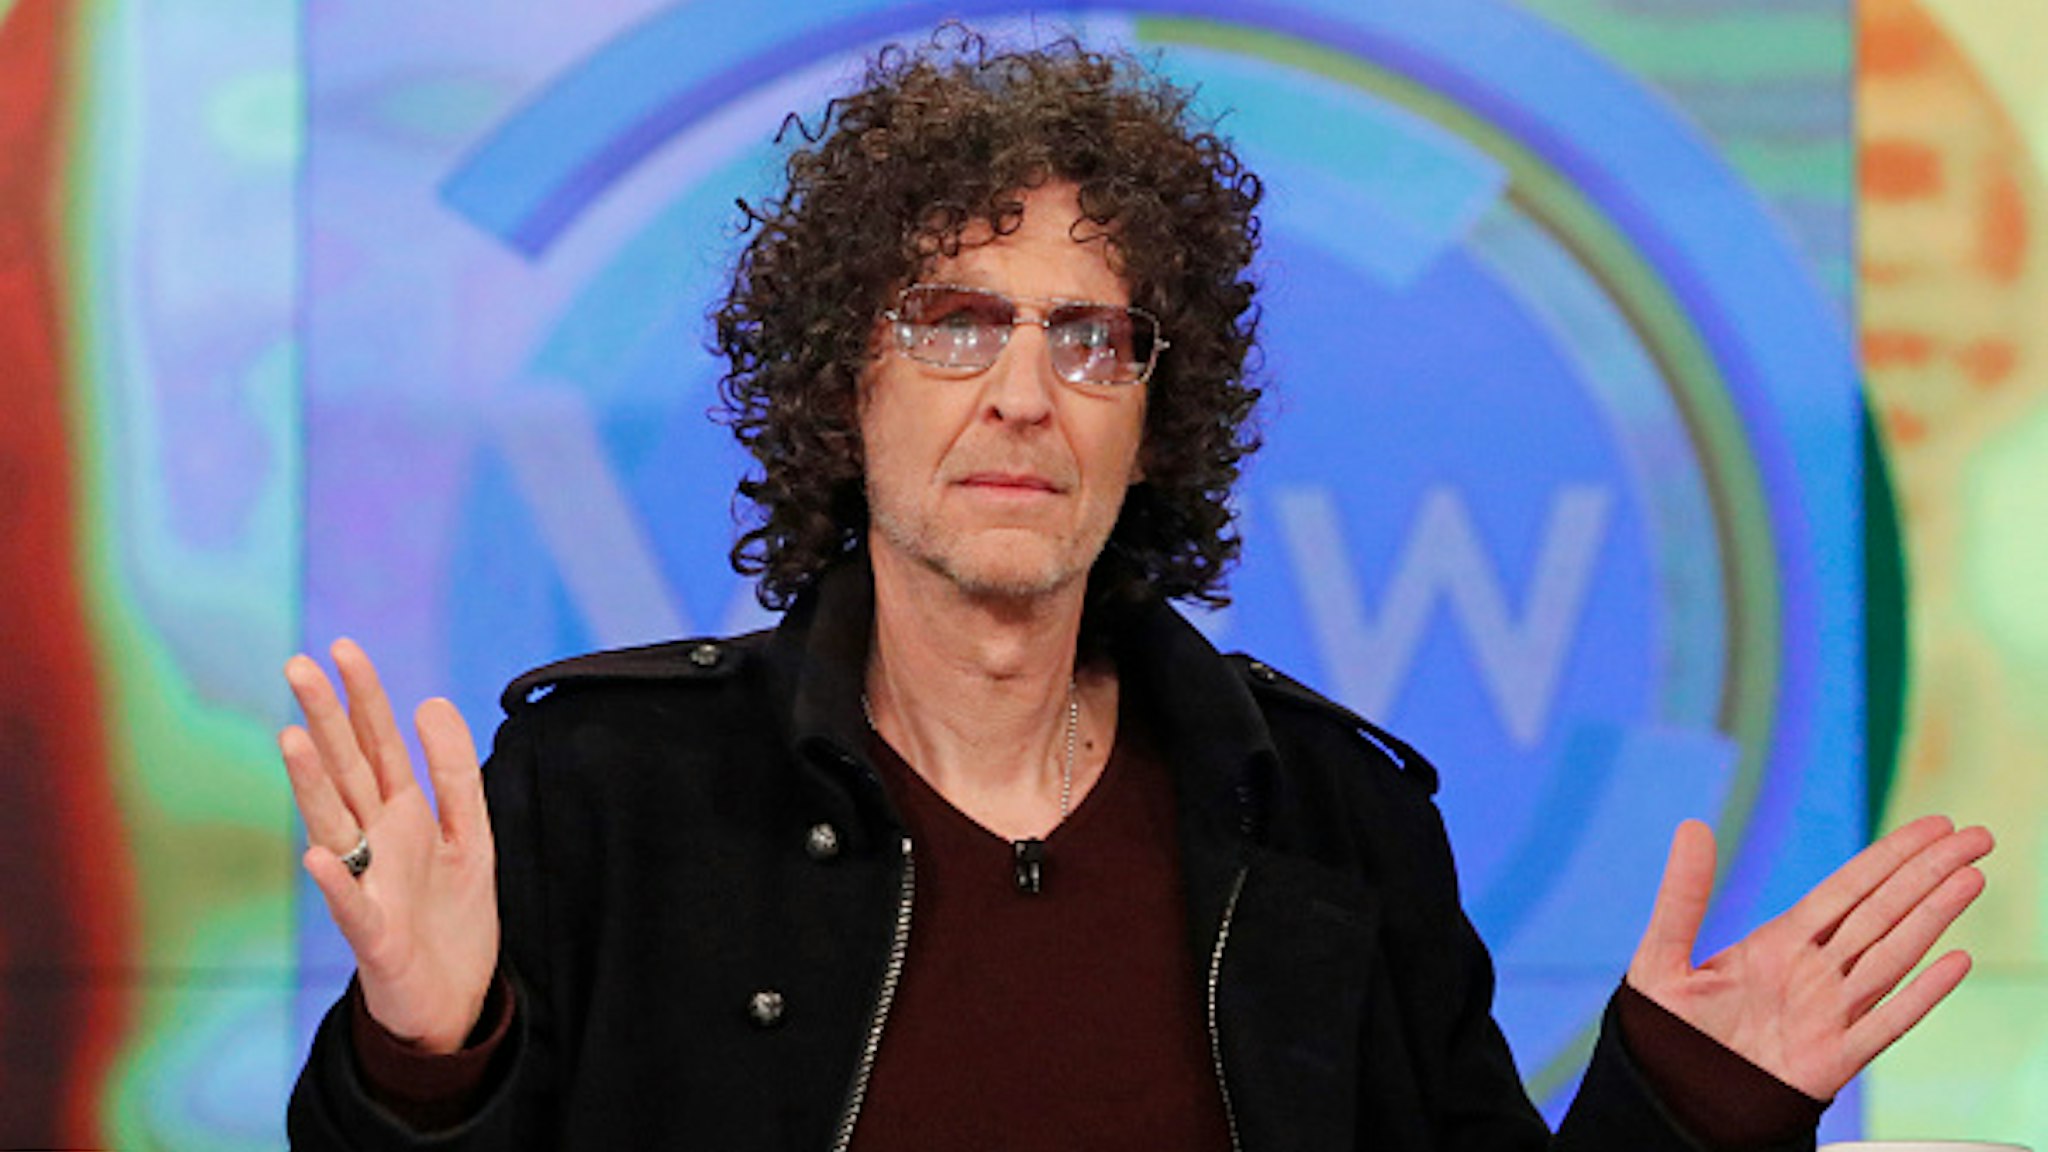 THE VIEW - Howard Stern is the guest today Thursday, 5/15/19 on Walt Disney Television via Getty Images's "The View." "The View" airs Monday-Friday (11am-12pm, ET) on Walt Disney Television via Getty Images.